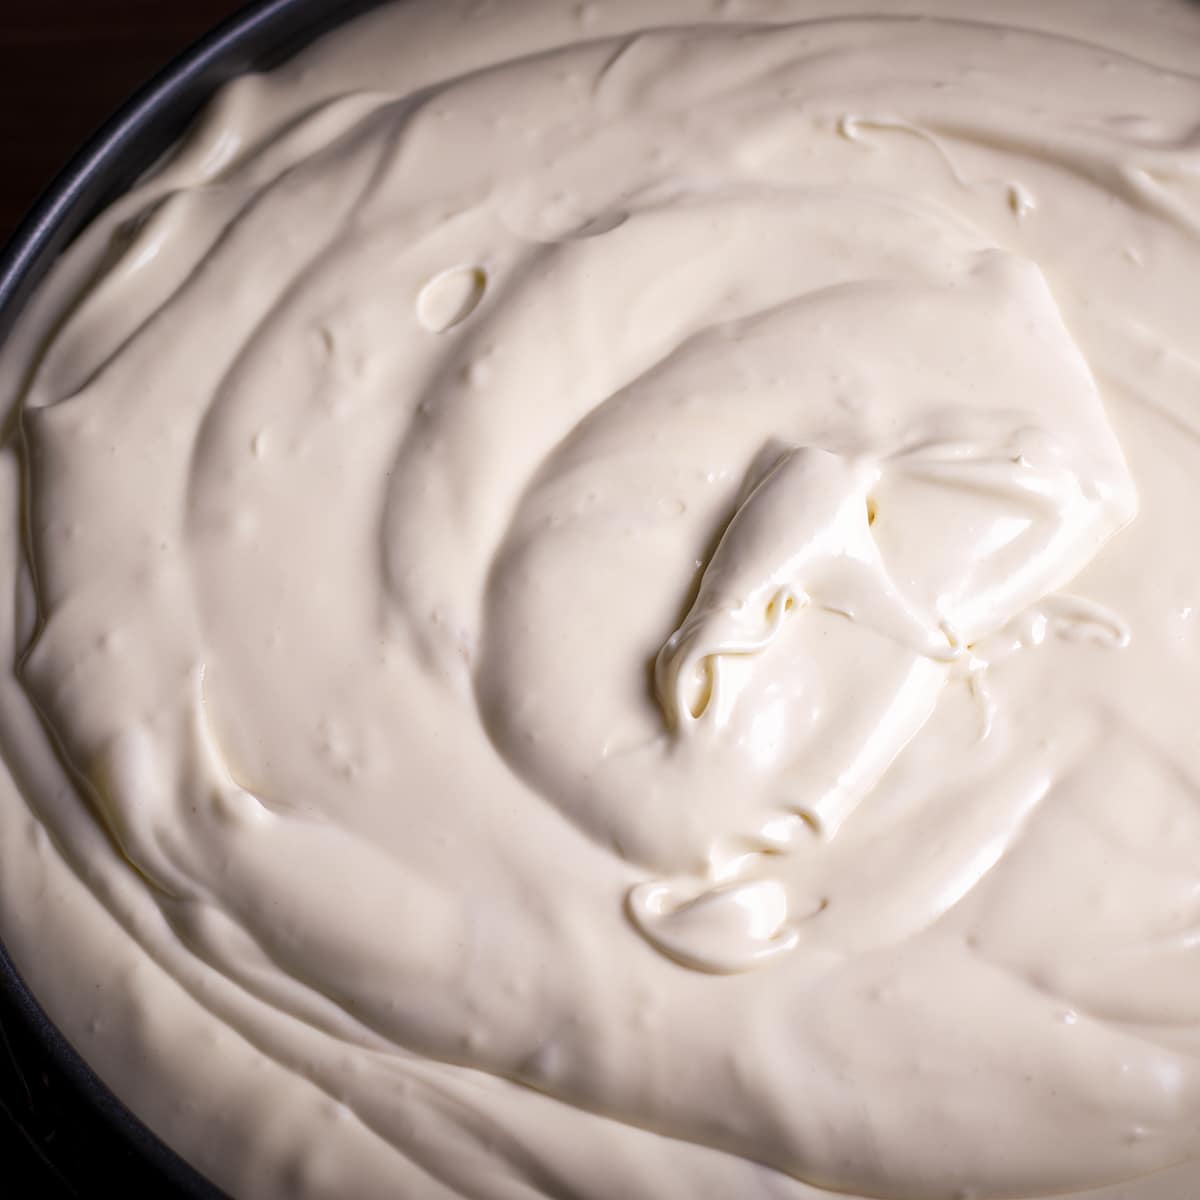 Pouring cheesecake batter into the pan before baking.